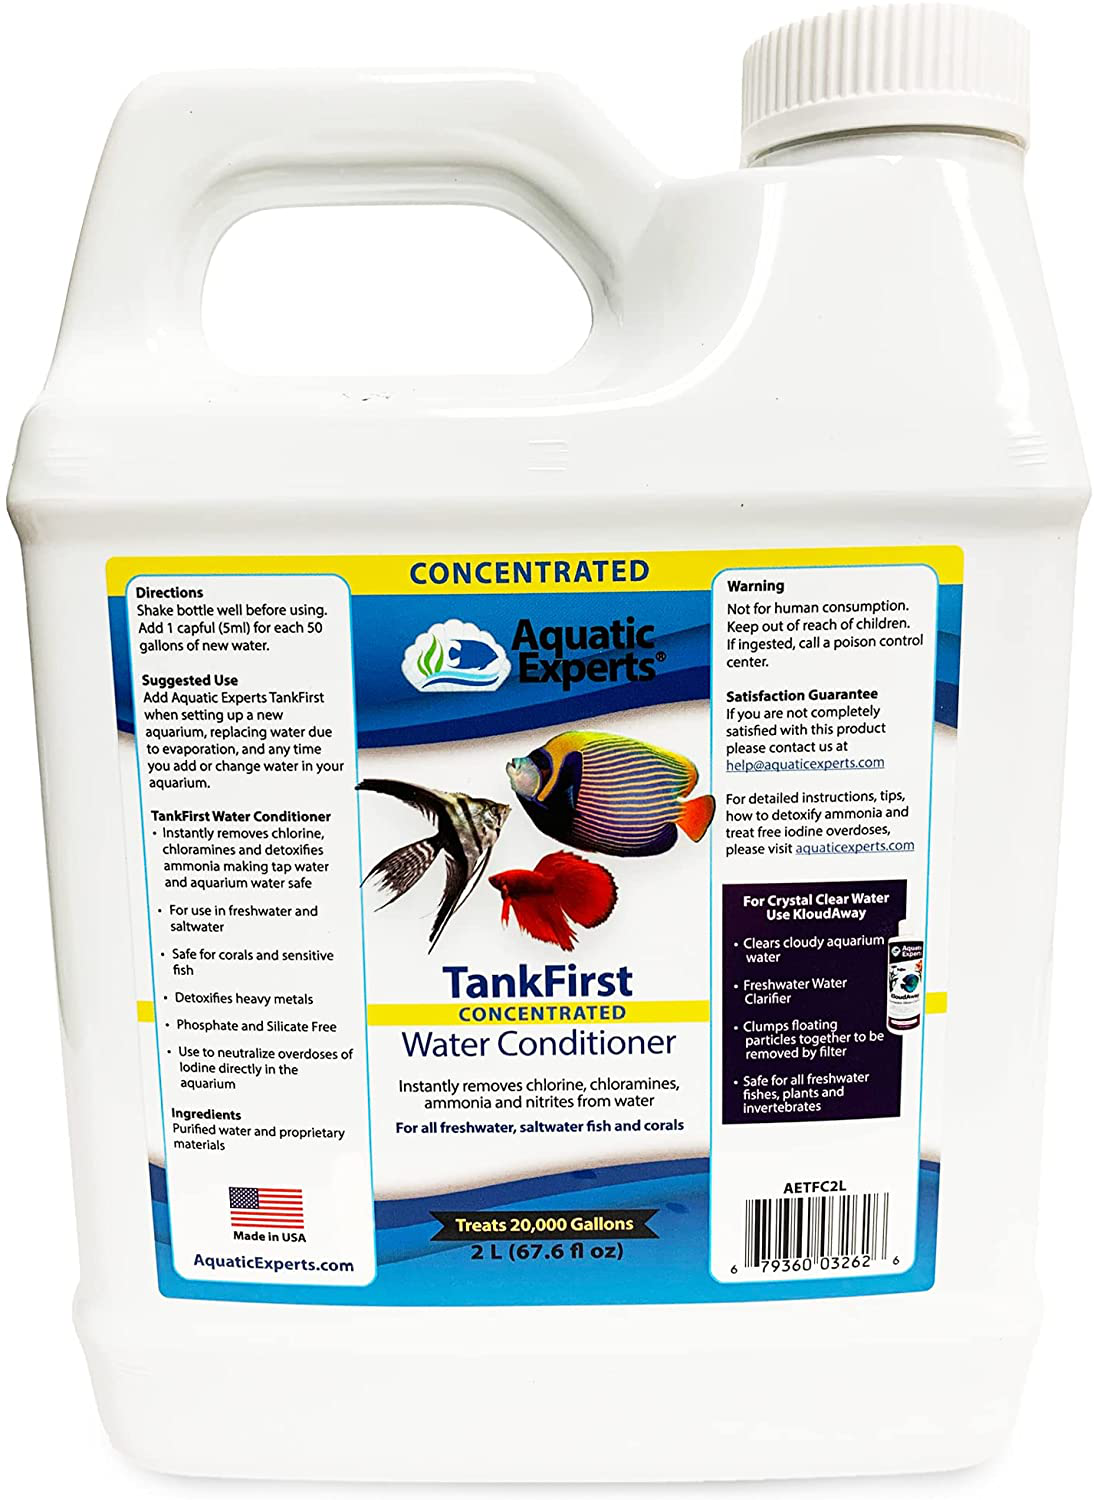 Tankfirst Complete Aquarium Water Conditioner - Fish Water Conditioner, Instantly Removes Chlorine, Chloramines, Ammonia and Nitrites from Fish Tanks Animals & Pet Supplies > Pet Supplies > Fish Supplies > Aquarium Cleaning Supplies Aquatic Experts Concentrated 2 Liters - Treats 20,000 gallons  